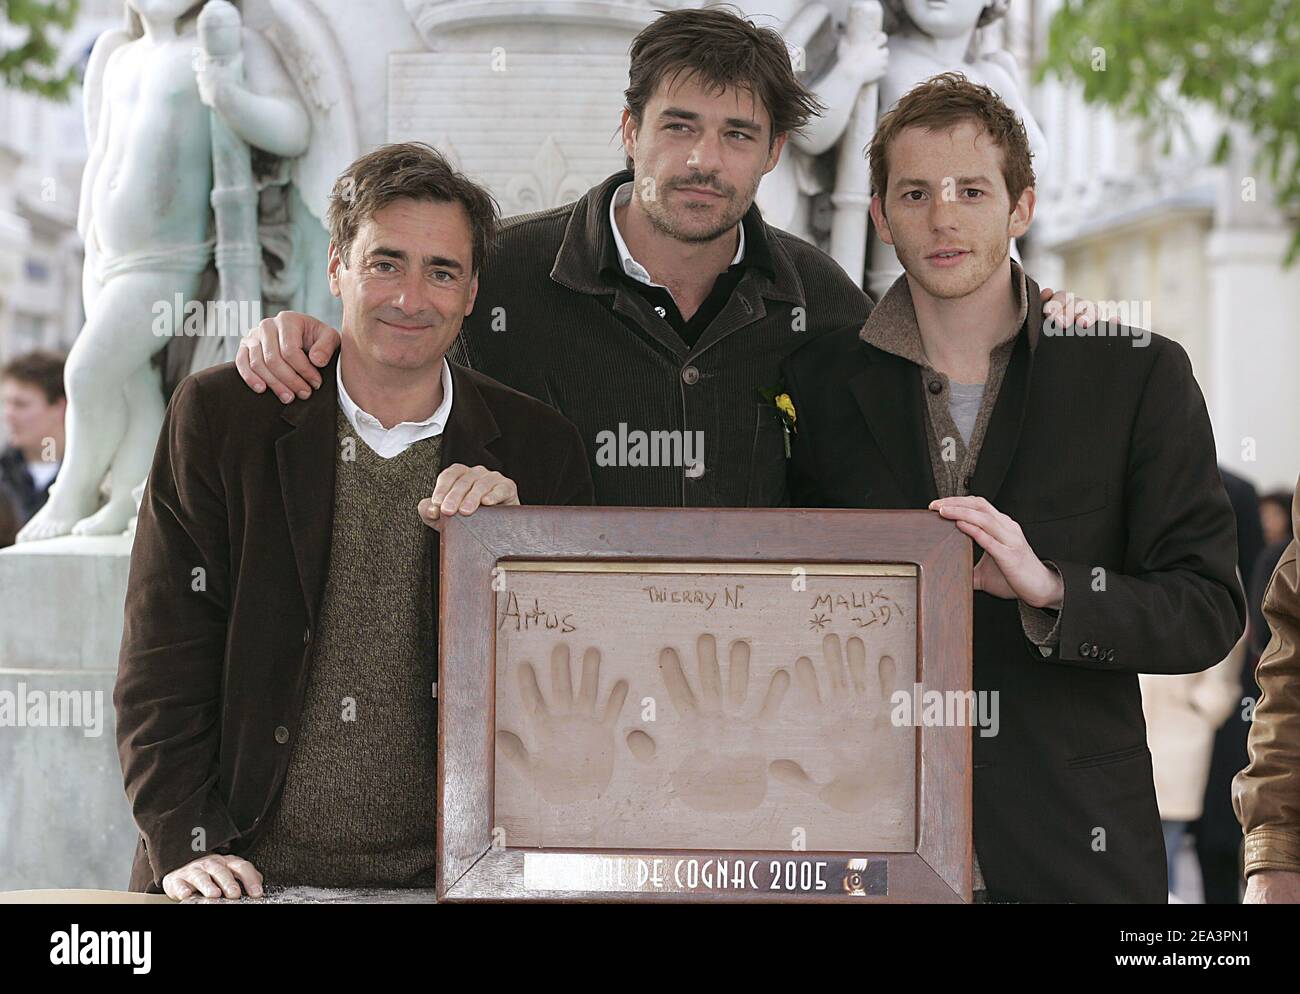 French director Artus de Penguern, French actors Thierry Neuvic and Malik Zidi pose with their handprints in clay during the 23rd Cognac Detective Film Festival in Cognac, France, on April 9, 2005. Photo by Patrick Bernard/ABACA. Stock Photo